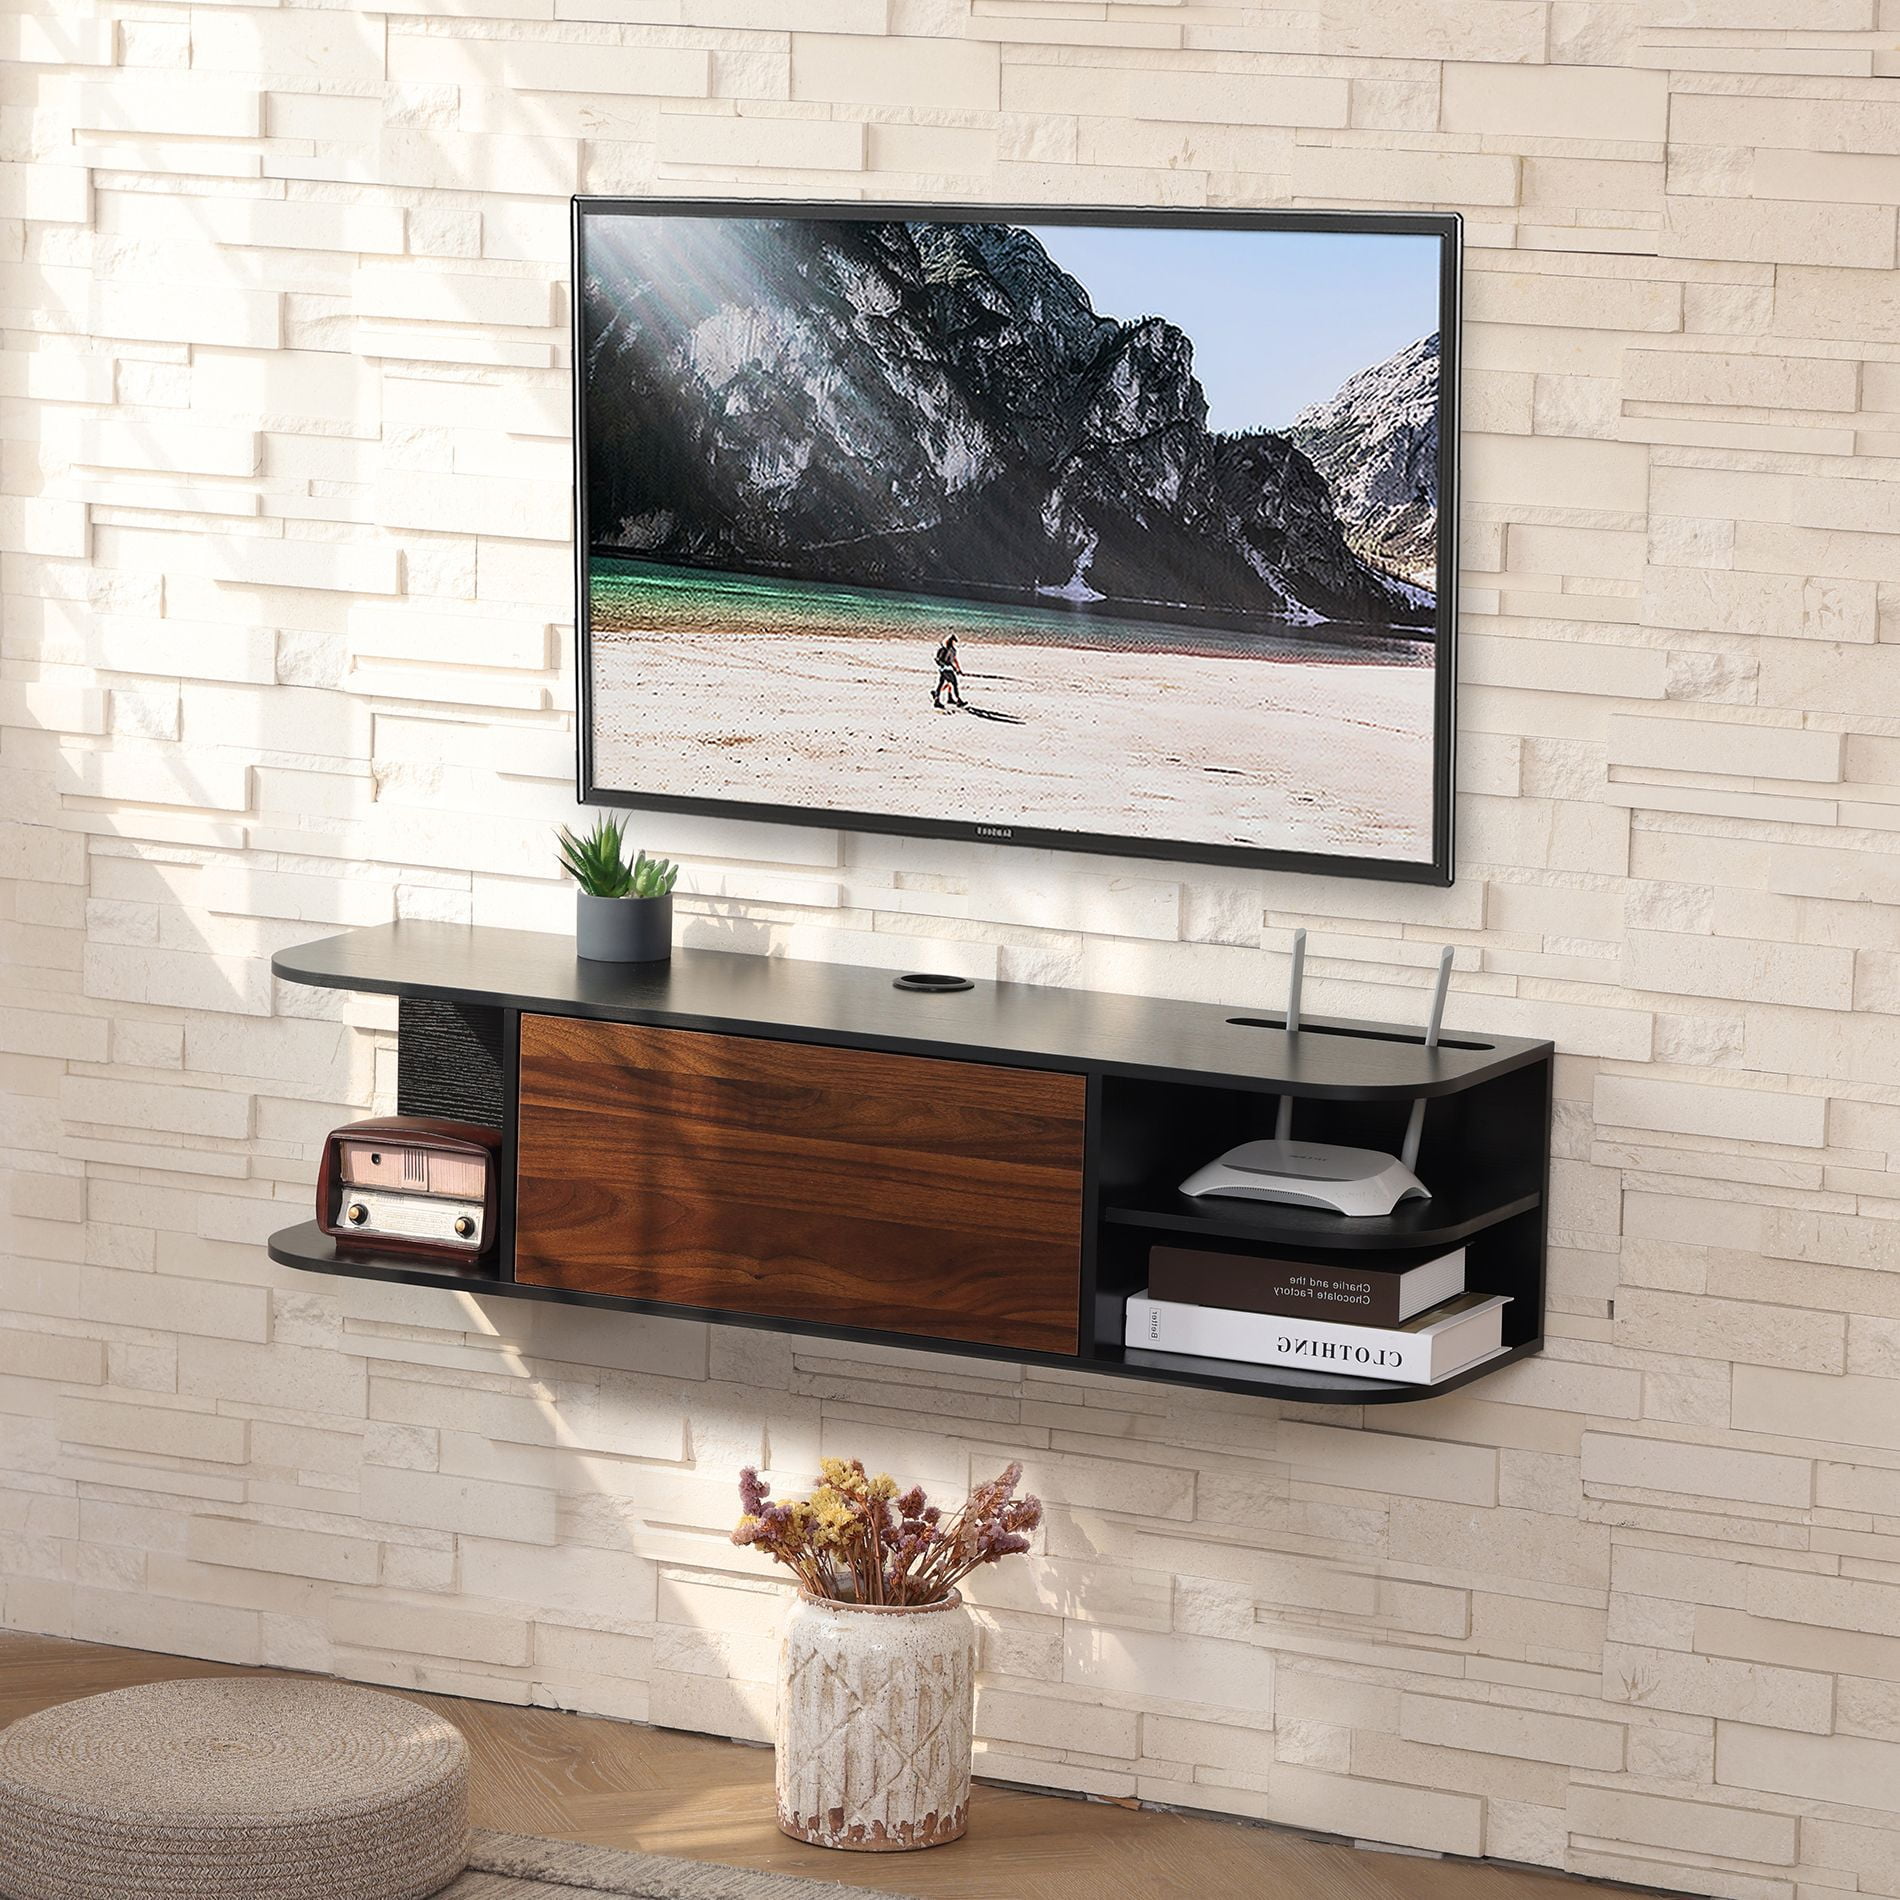 FITUEYES Universal Wall Mount Media/AV Console,Floating TV Stand 